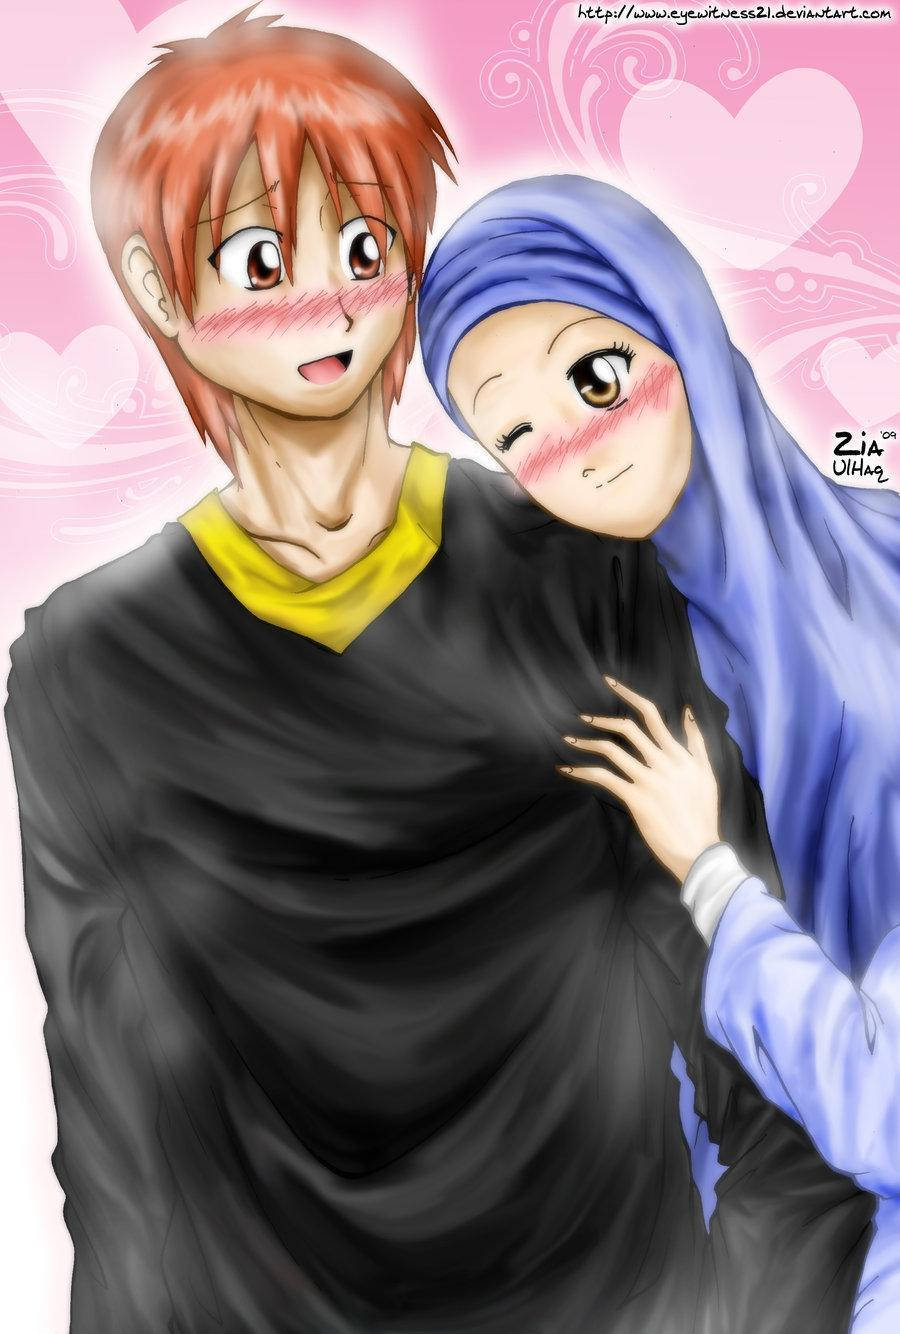 Top 999+ Muslim Couple Wallpapers Full HD, 4K✅Free to Use